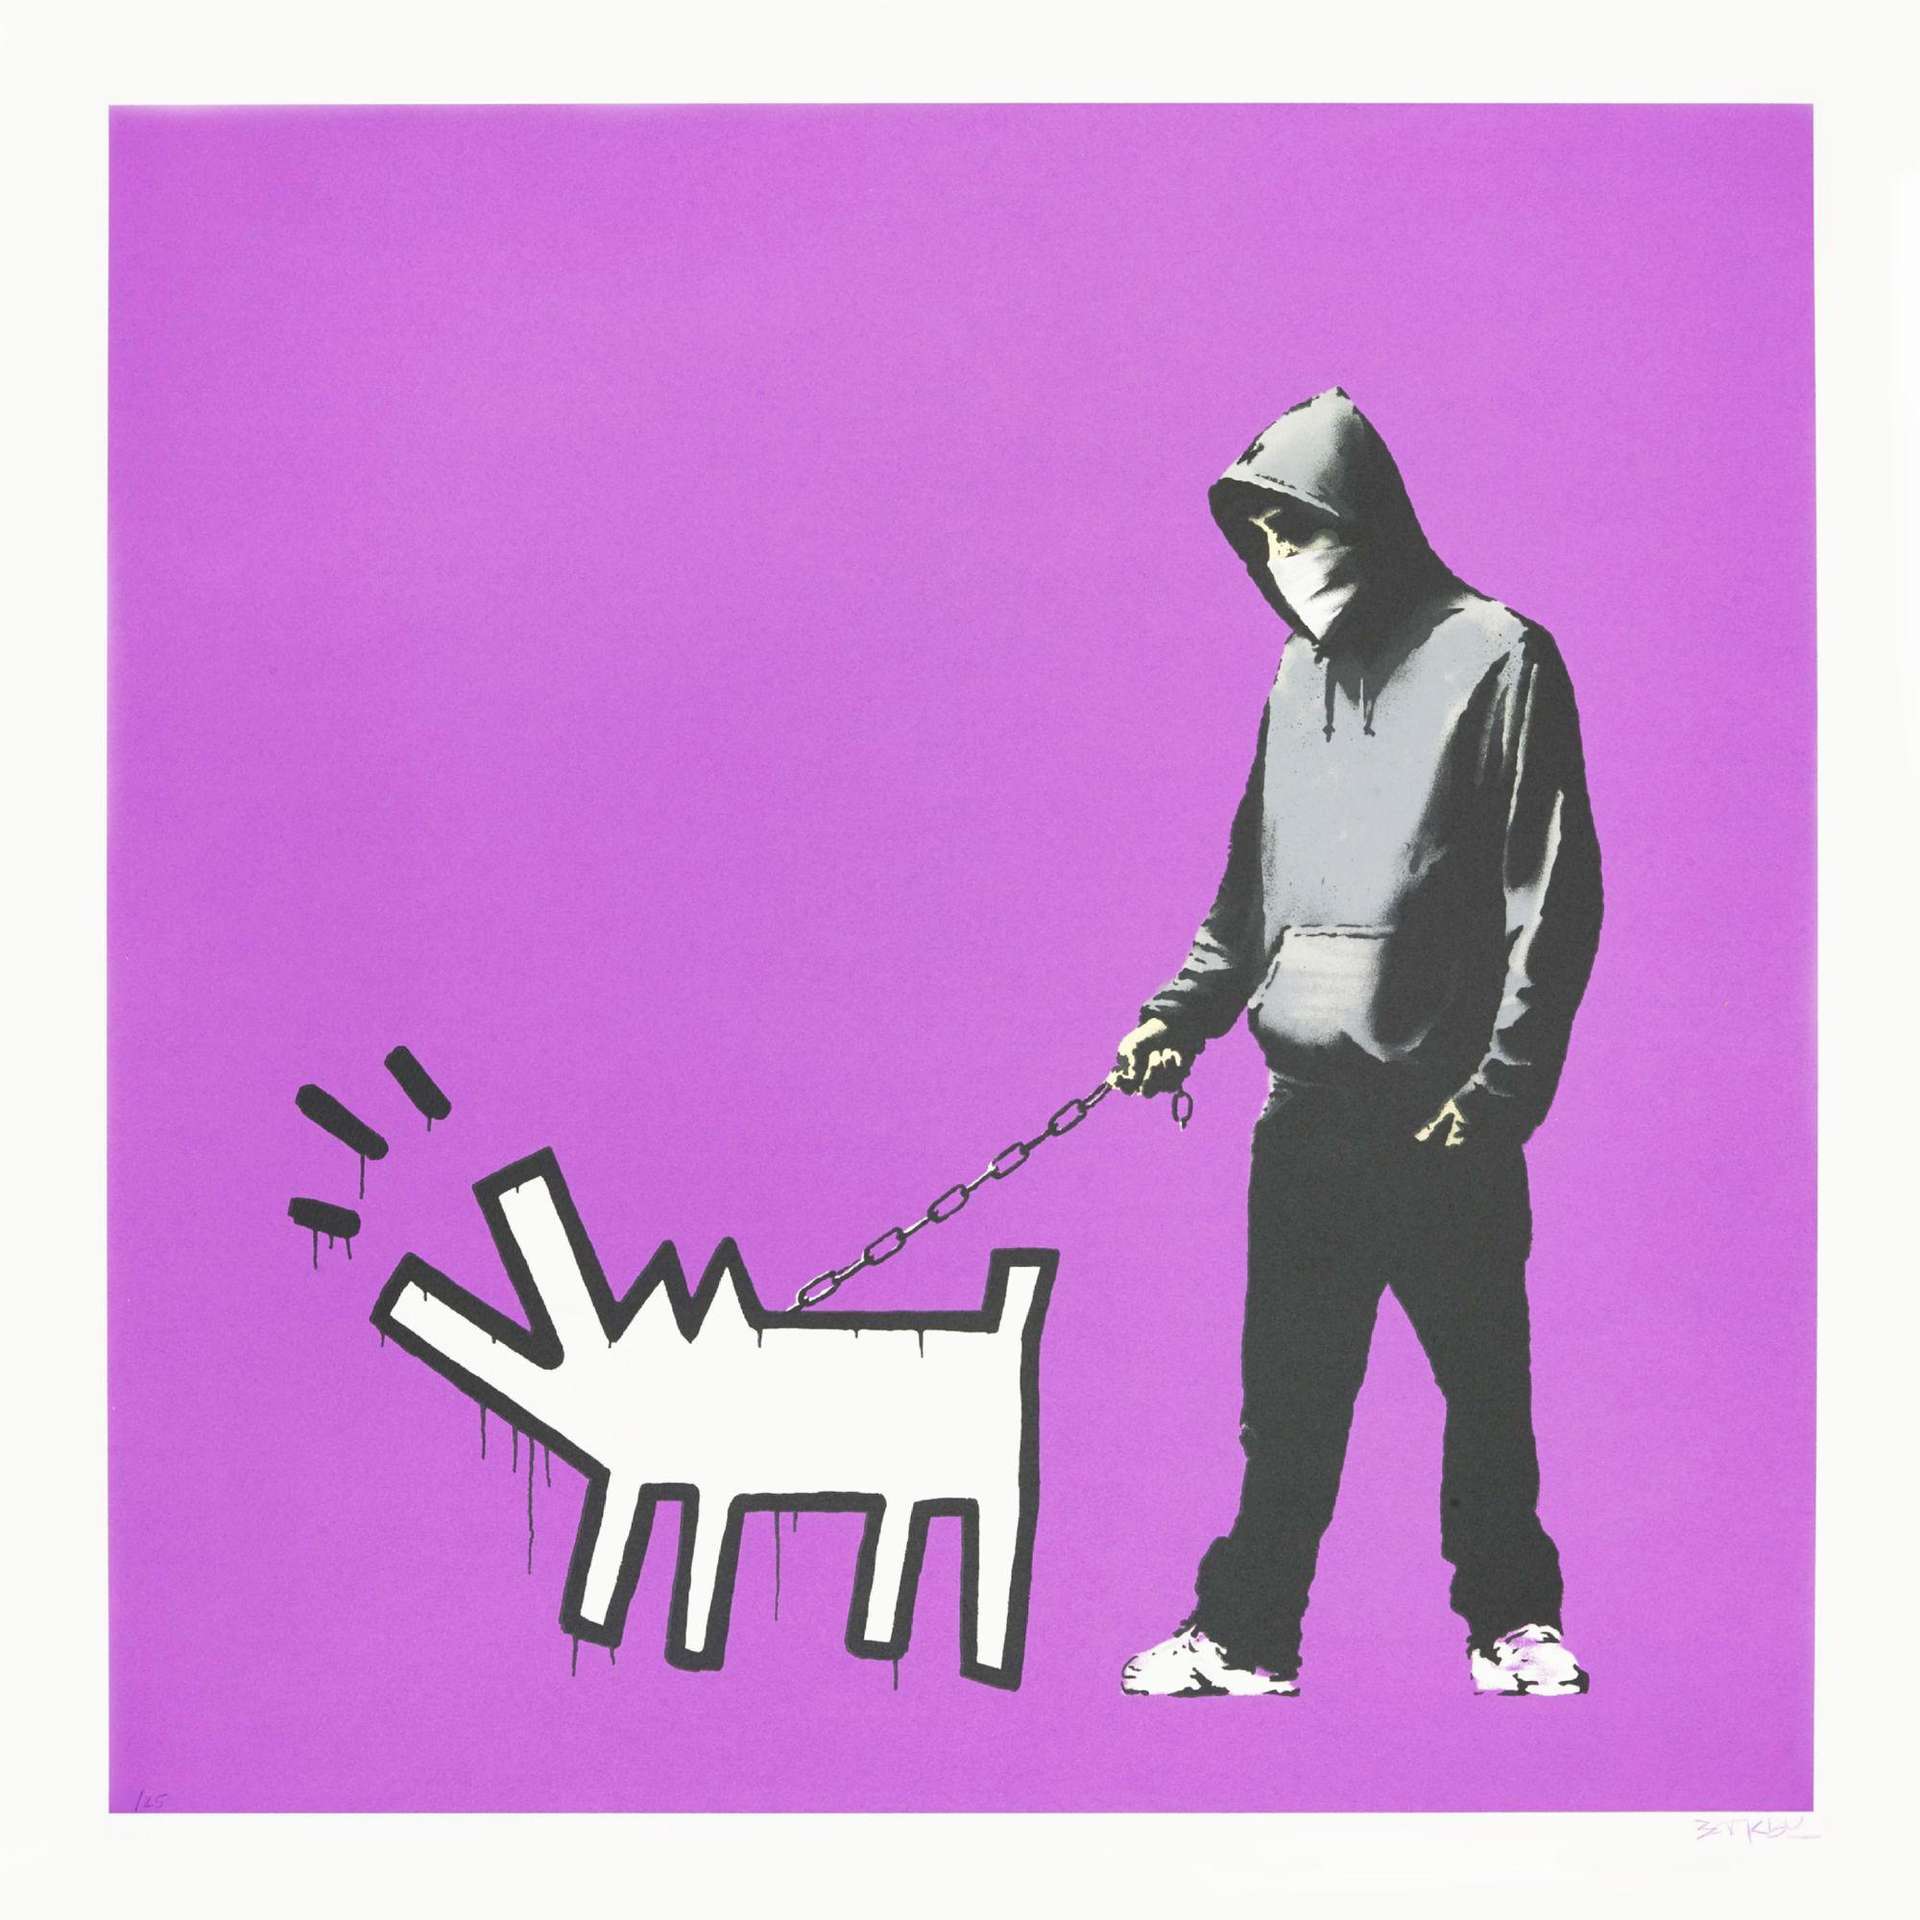 Choose Your Weapon (Bright Purple),Signed Print by Banksy - MyArtBroker 